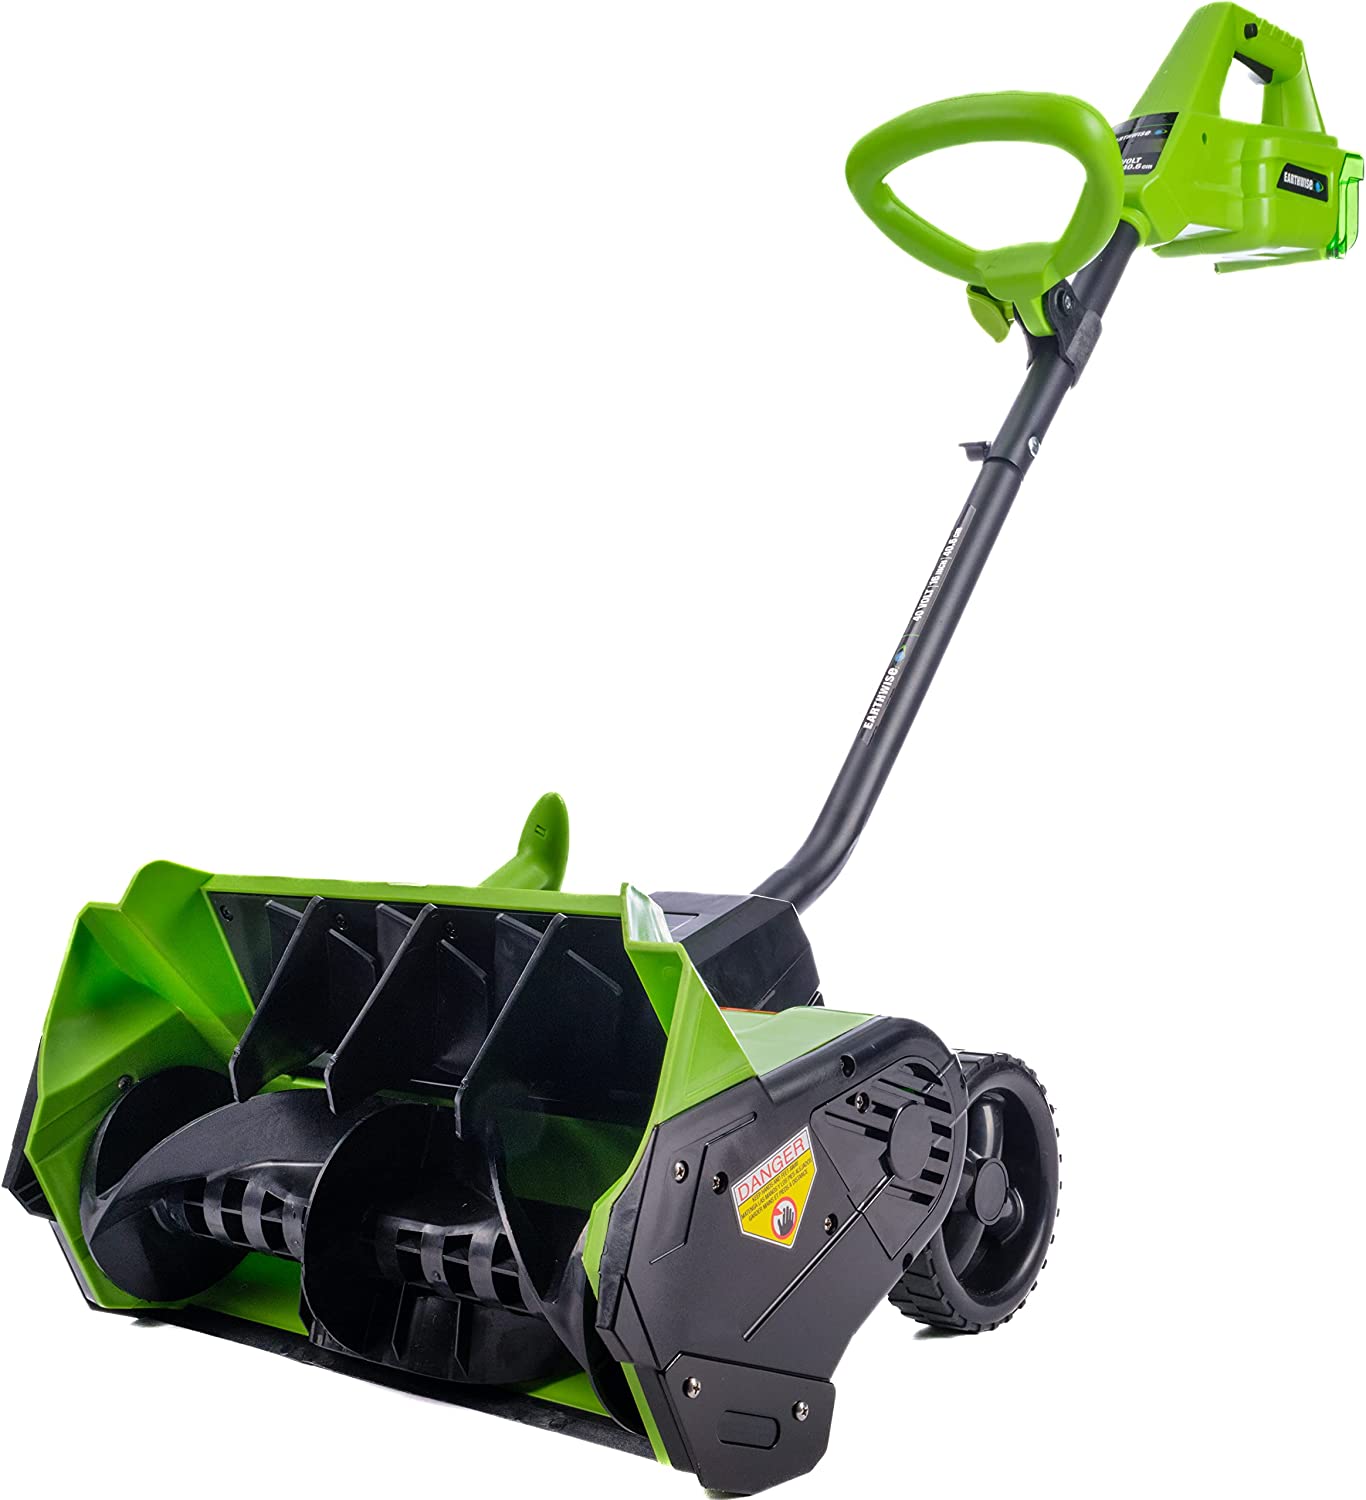 Earthwise SN74016 40V Lithium Battery Operated Ion Cordless 16" Snow Shovel with Brushless Motor - image 2 of 10